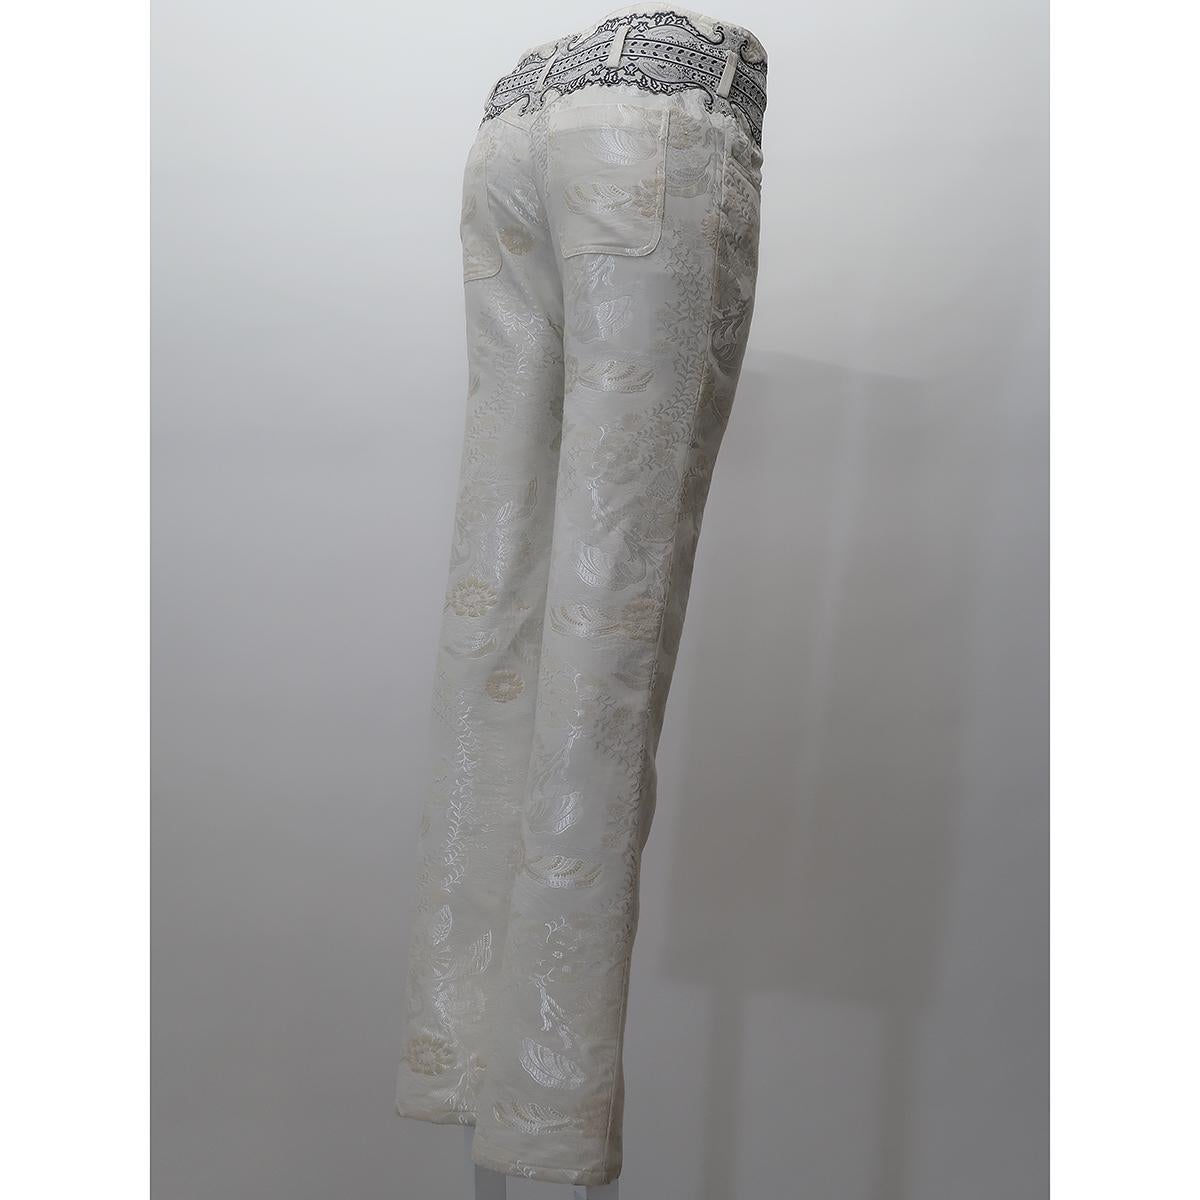 BALENCIAGA by Nicolas Ghesquière
Introducing the epitome of sartorial refinement: the trousers from Nicolas Ghesquière's Spring 2006 collection. With meticulous attention to detail and an innovative approach to design, these trousers redefine modern